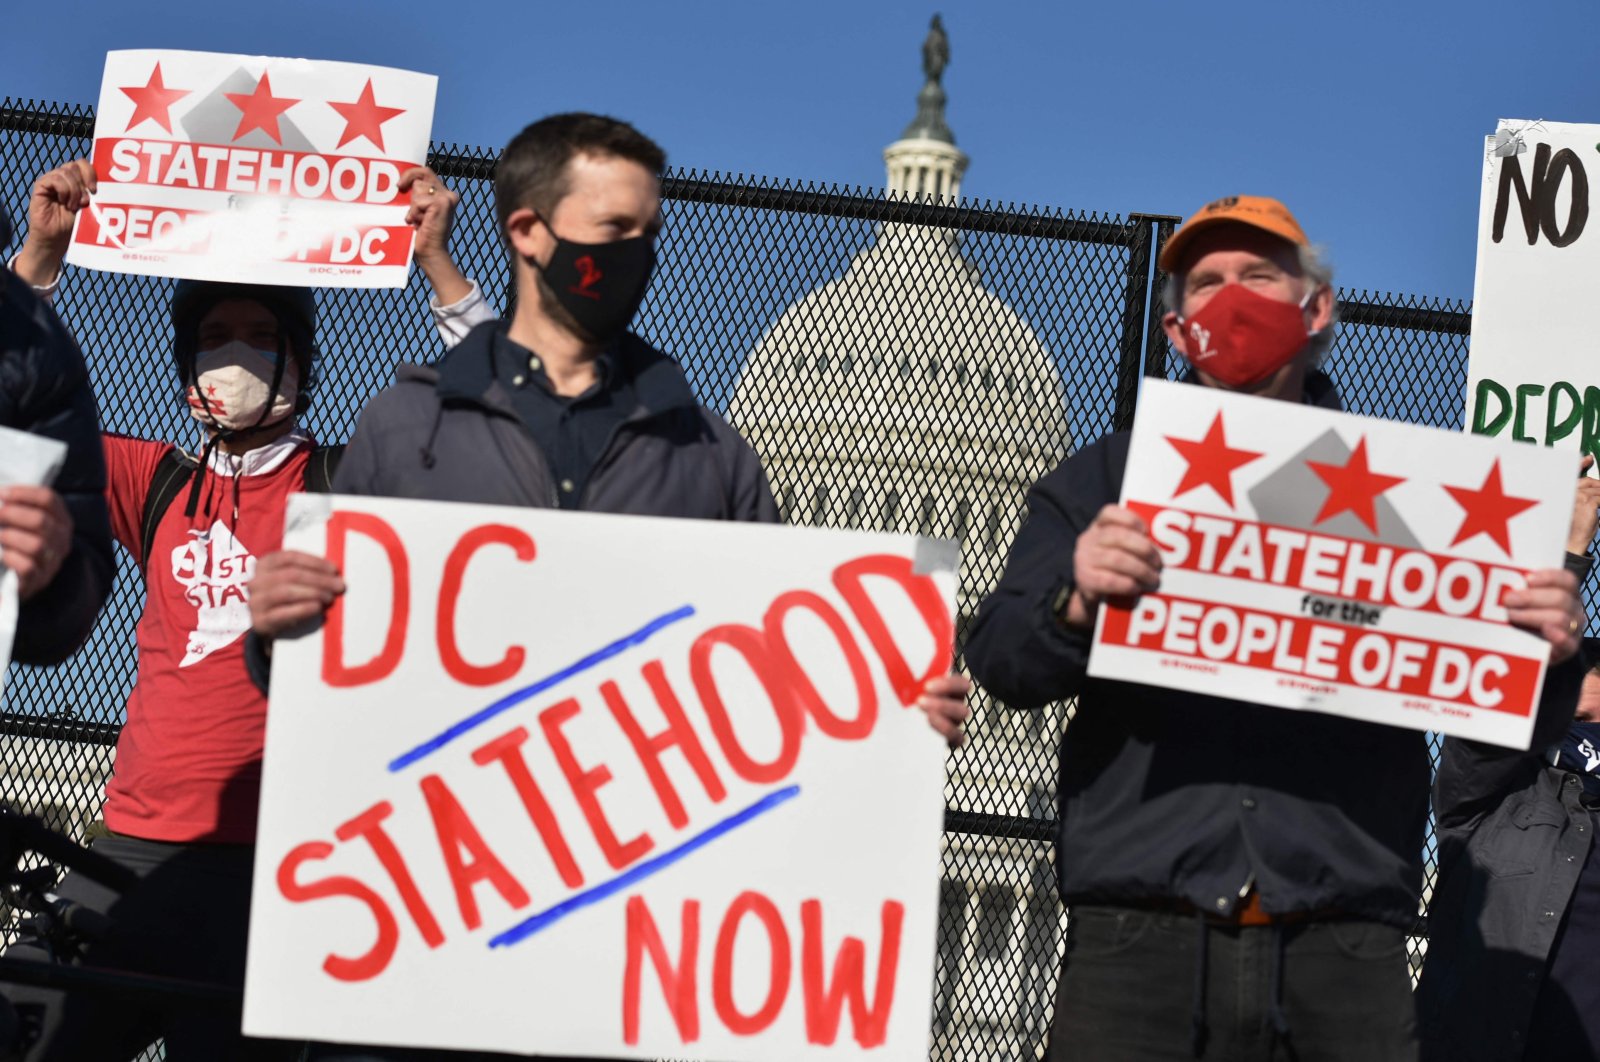 In this file photo activists hold signs as they take part in a rally in support of D.C. statehood near the U.S. Capitol in Washington, D.C., March 22, 2021. (AFP Photo)